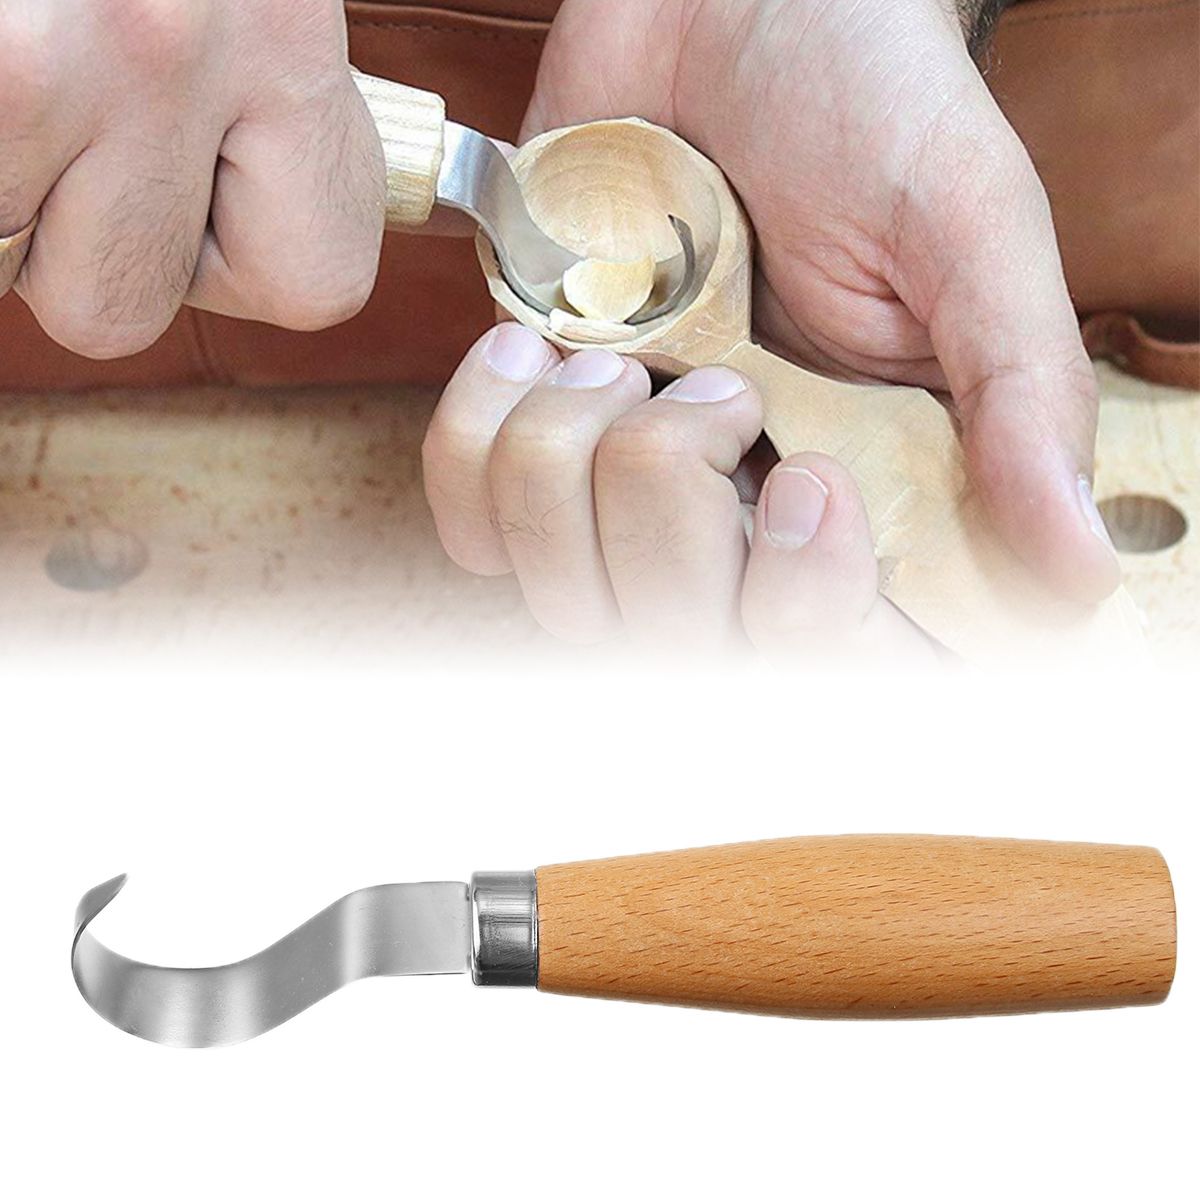 Wood-Carving-Hook-Spoon-Chisel-Woodworking-Cutter-Craft-Sharp-Edge-Tool-1565890